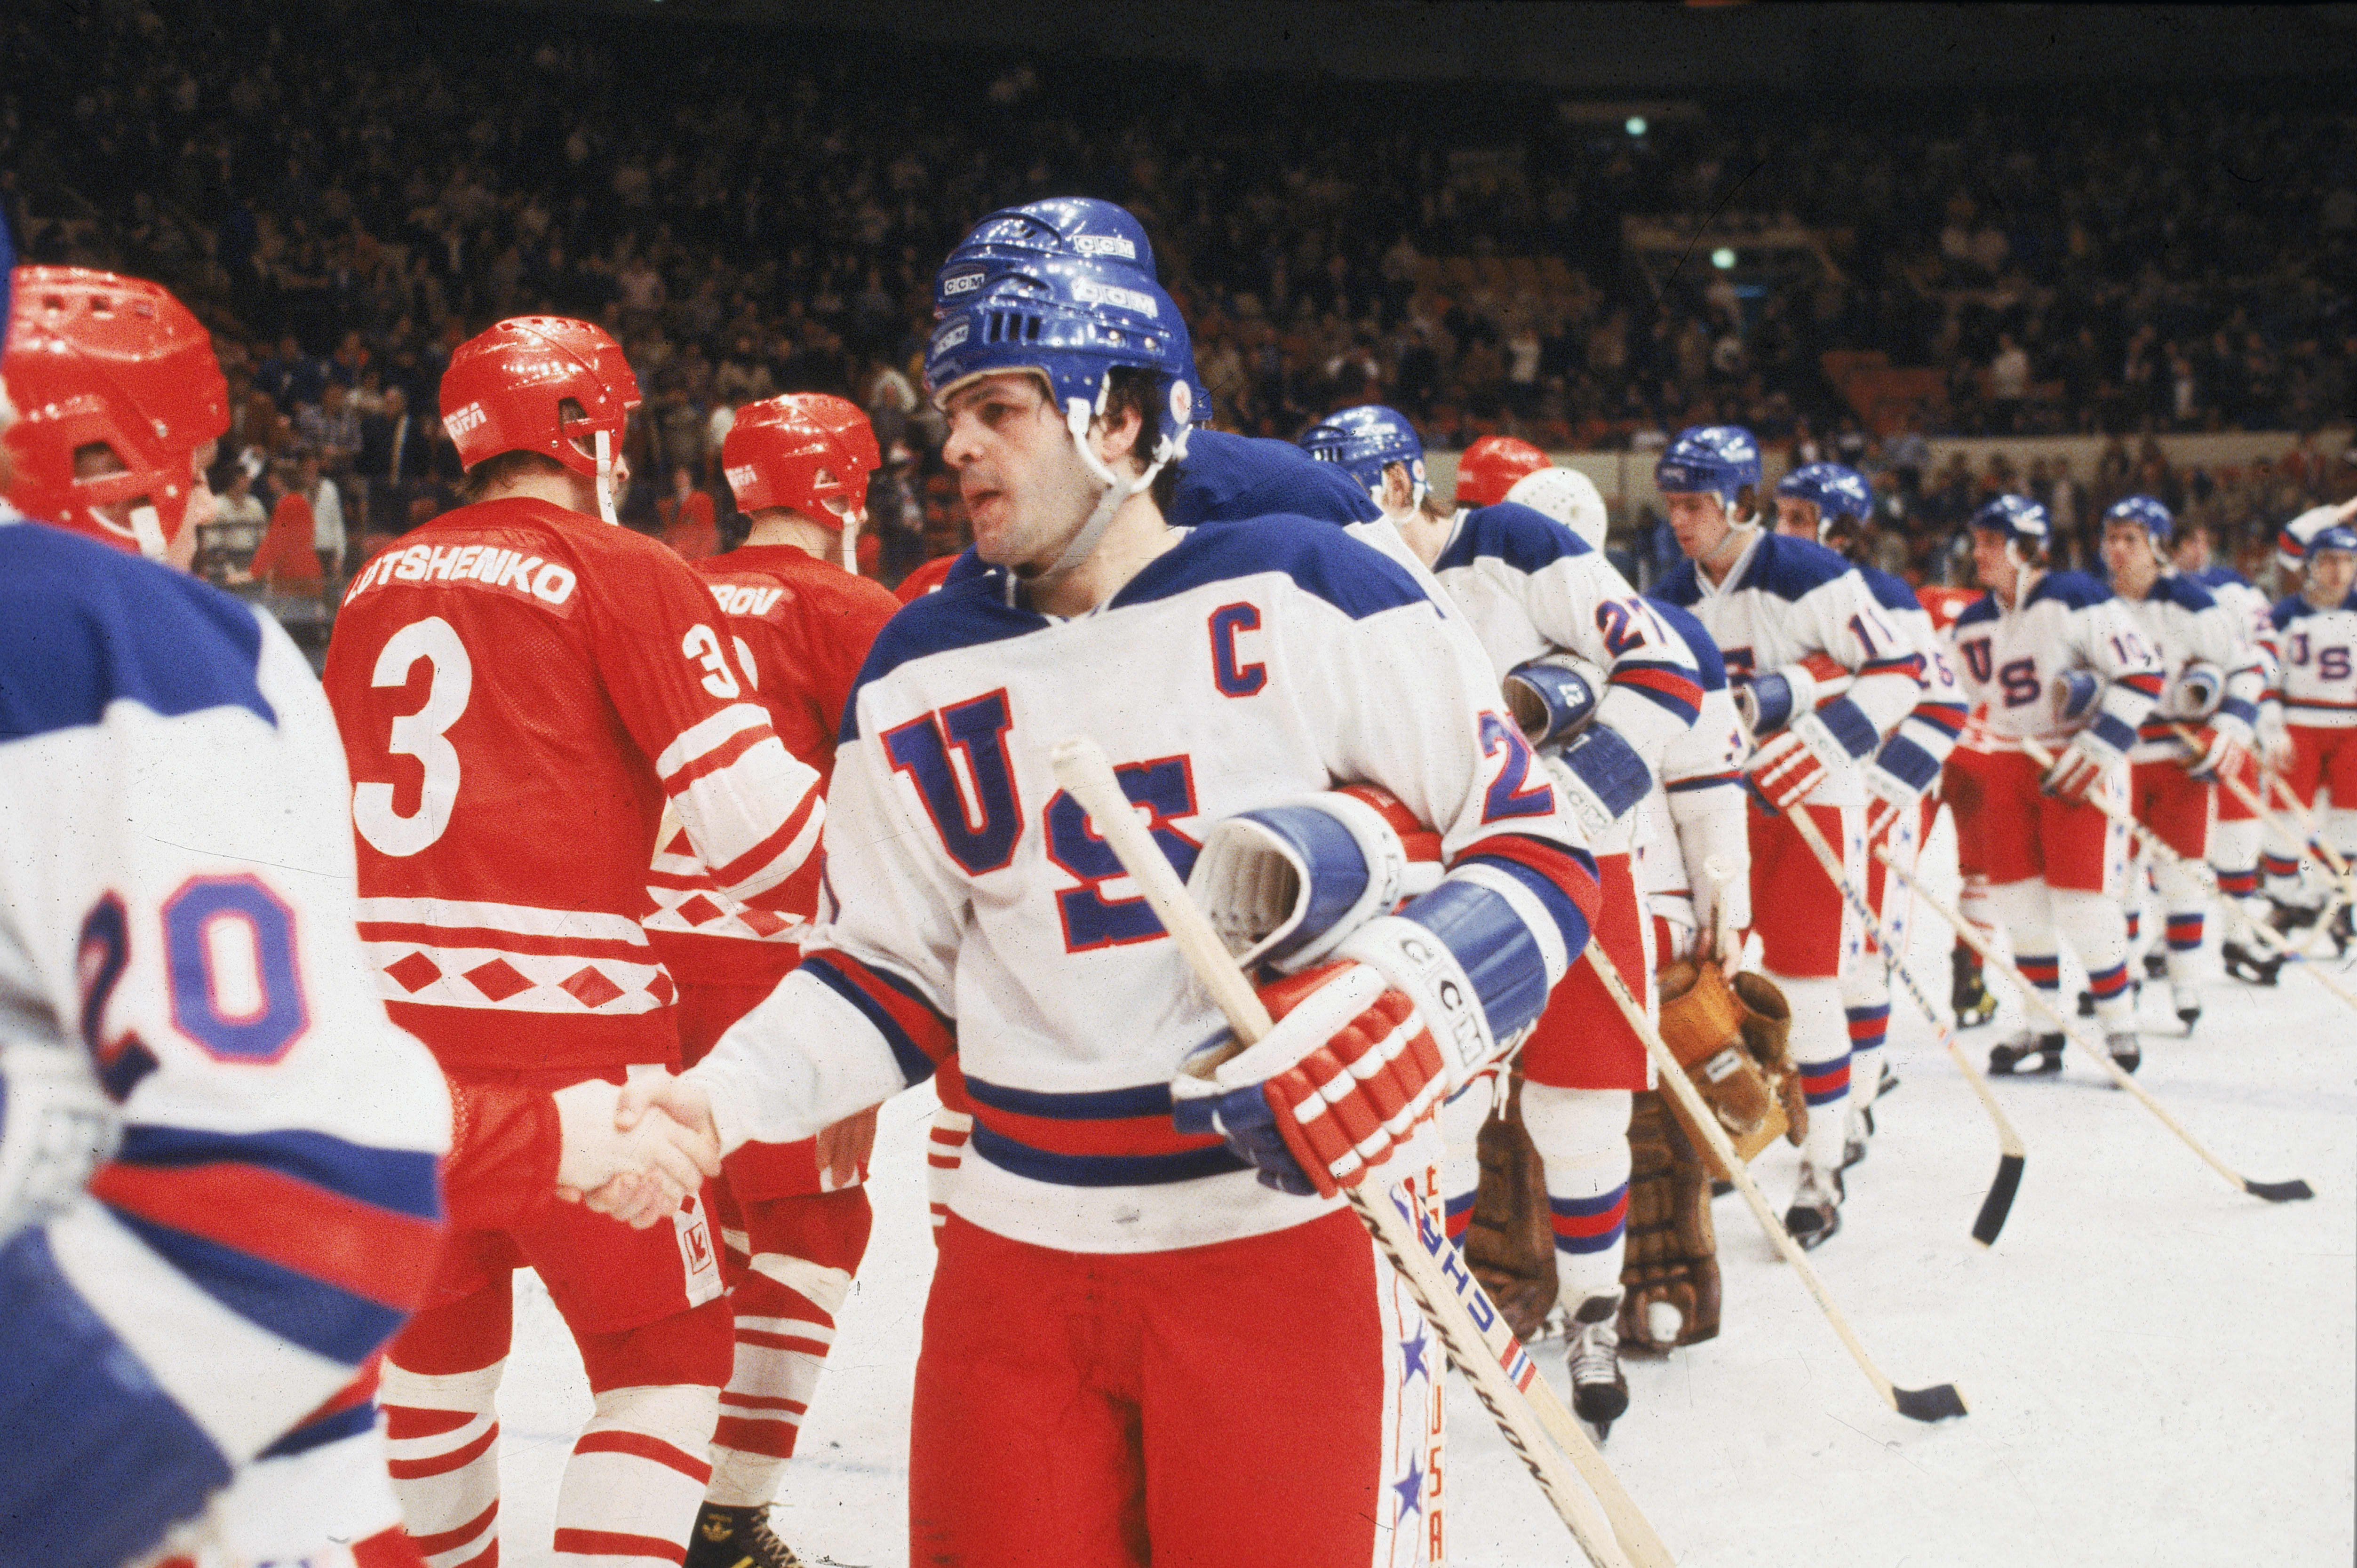 Al Michaels on Miracle on Ice broadcast ahead of 40th anniversary